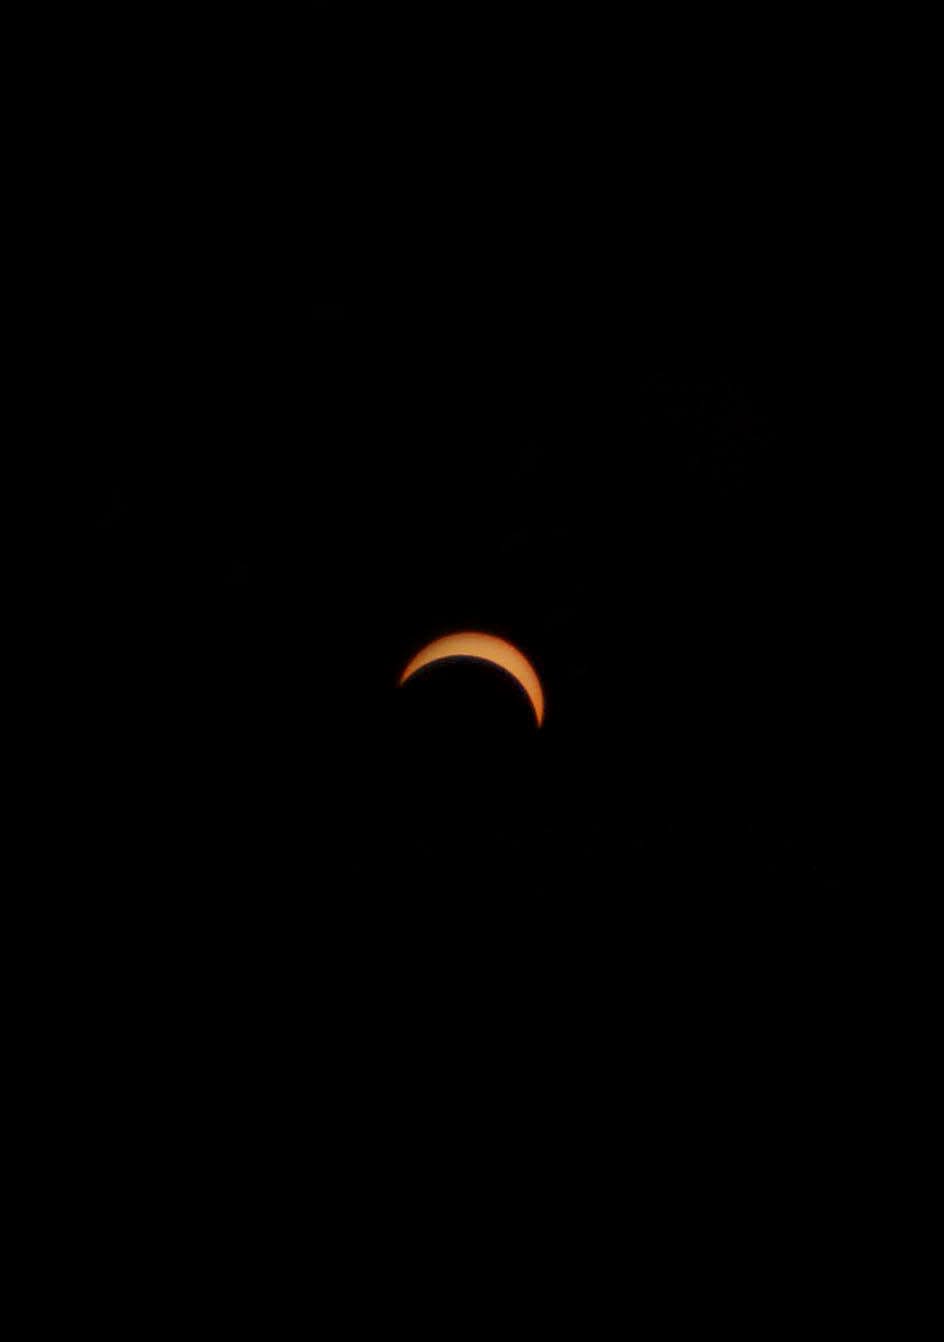 The solar eclipse in Northern Michigan reaches about its peak point at 86 percent coverage in Harbor Springs on Monday, April 8.